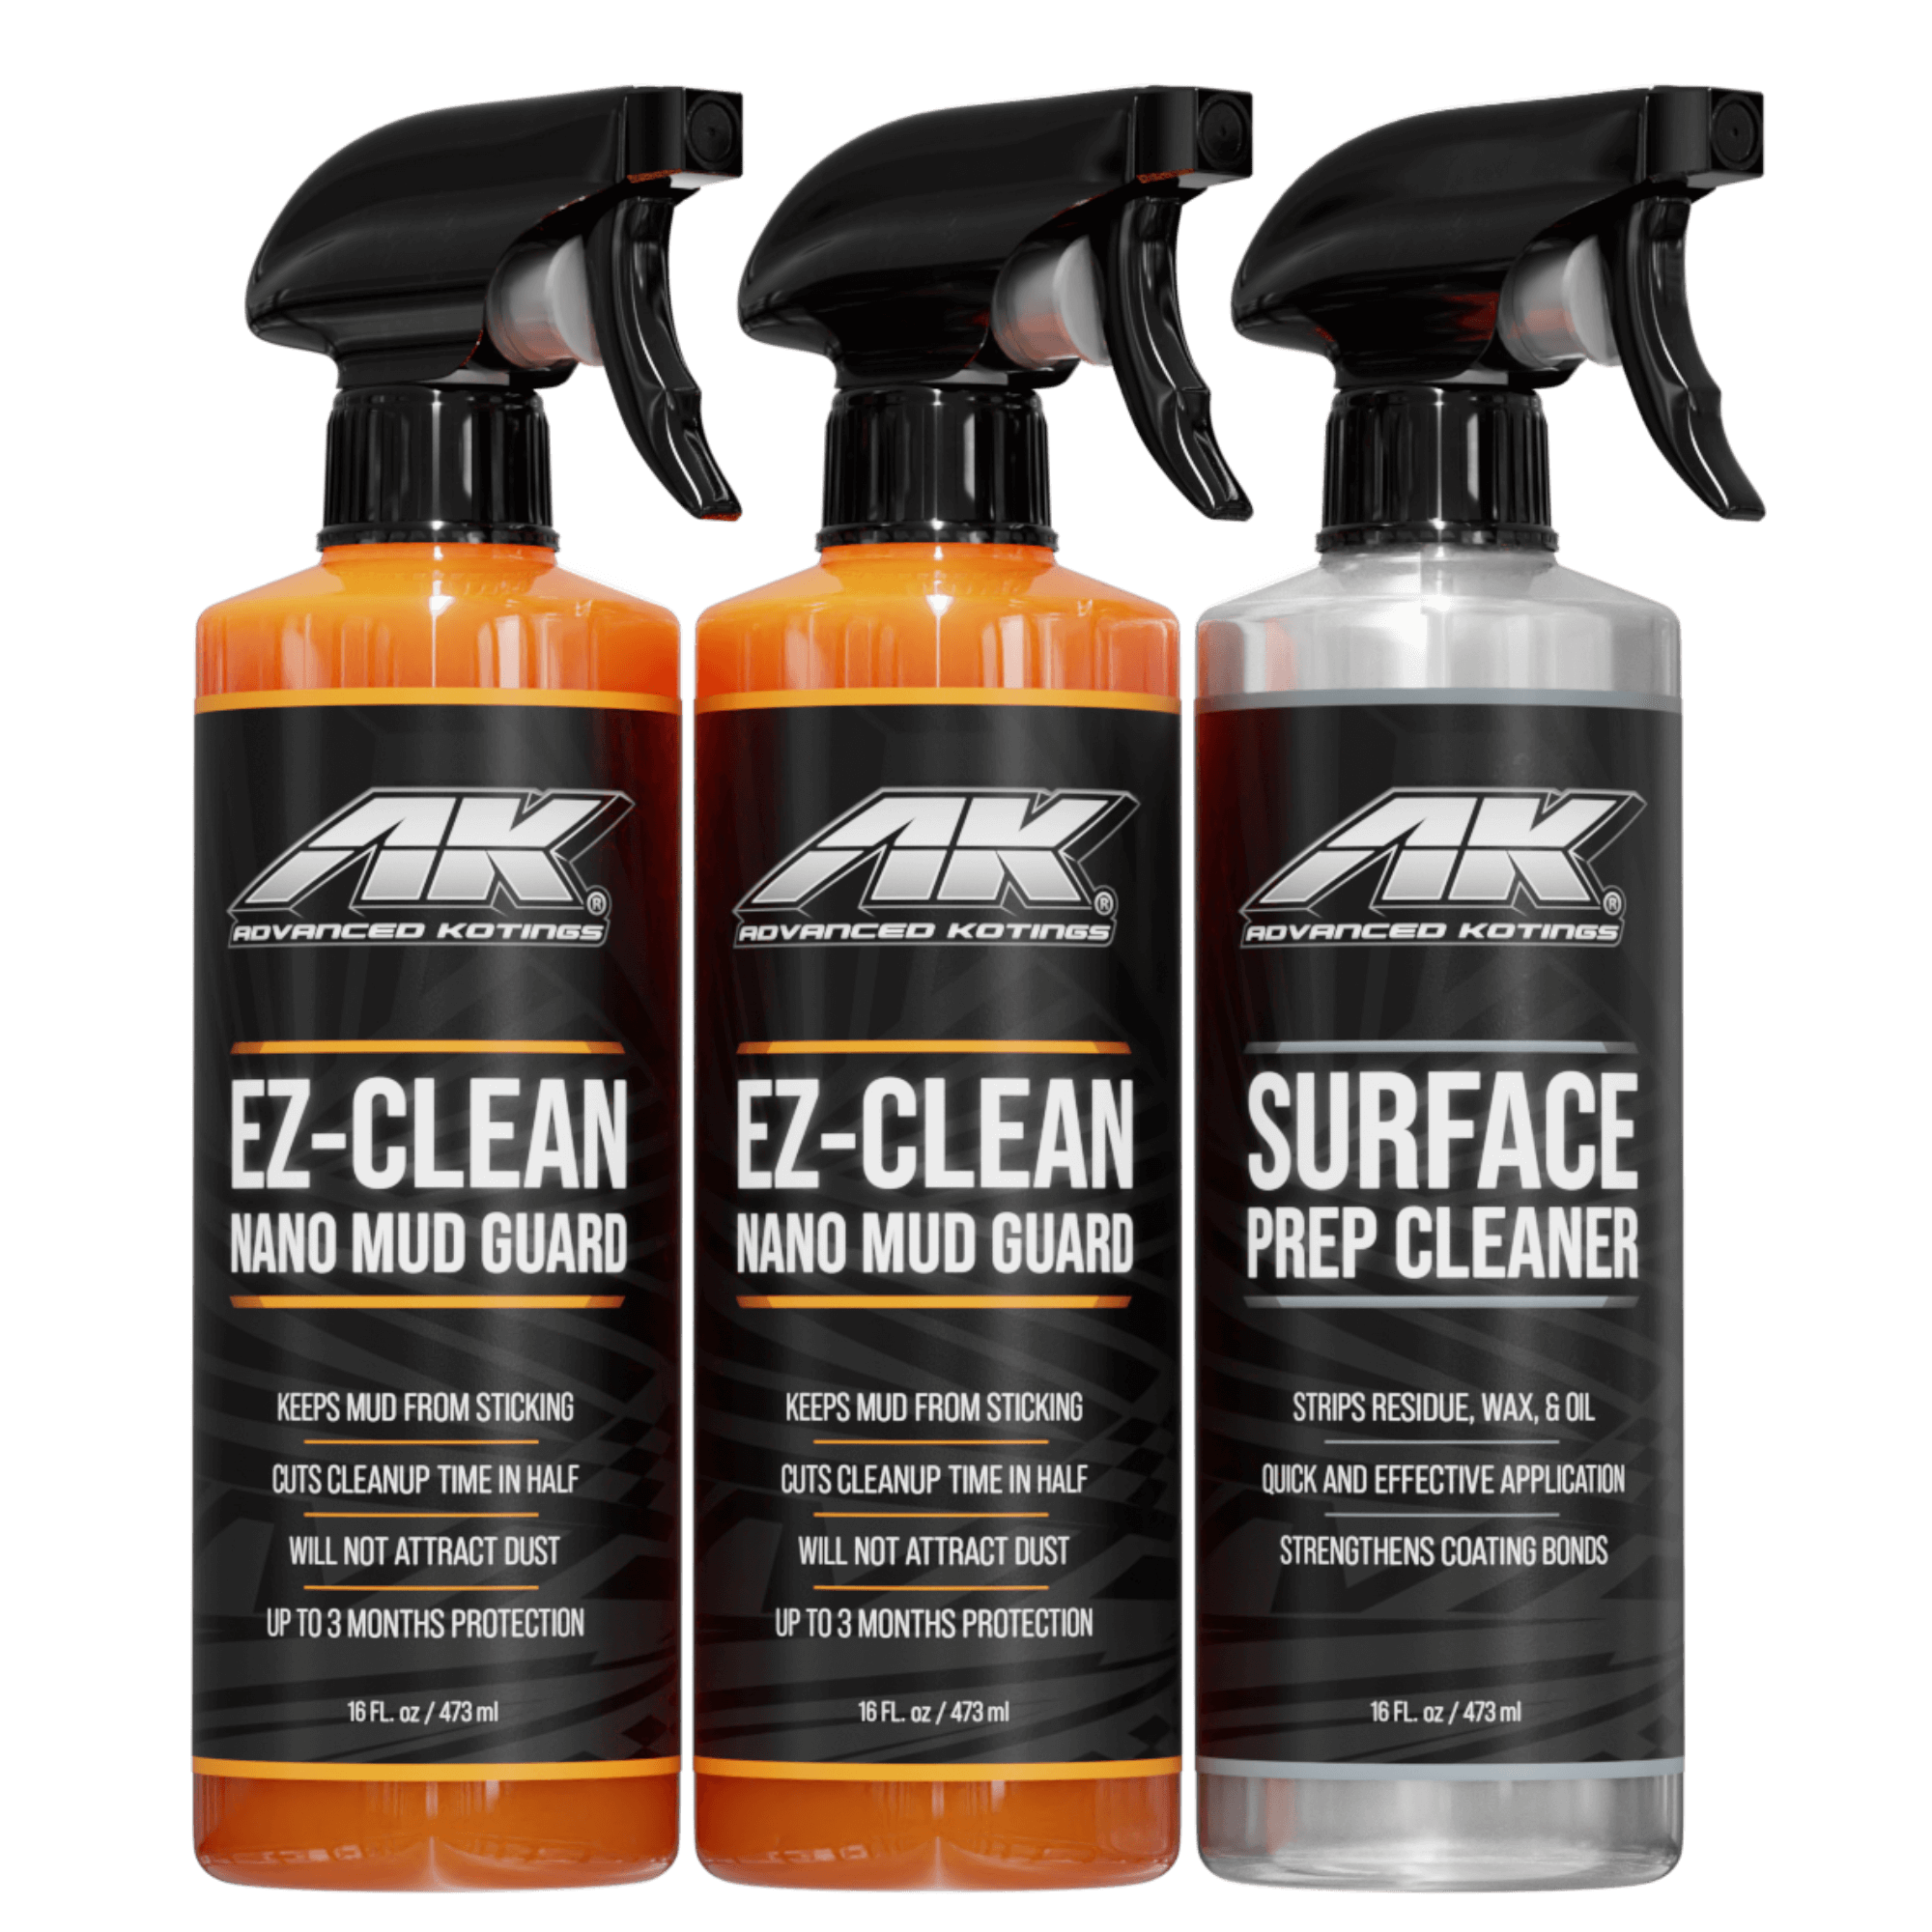 EZ-Clean Nano Mud Guard 2 Pack with Surface Prep Cleaner